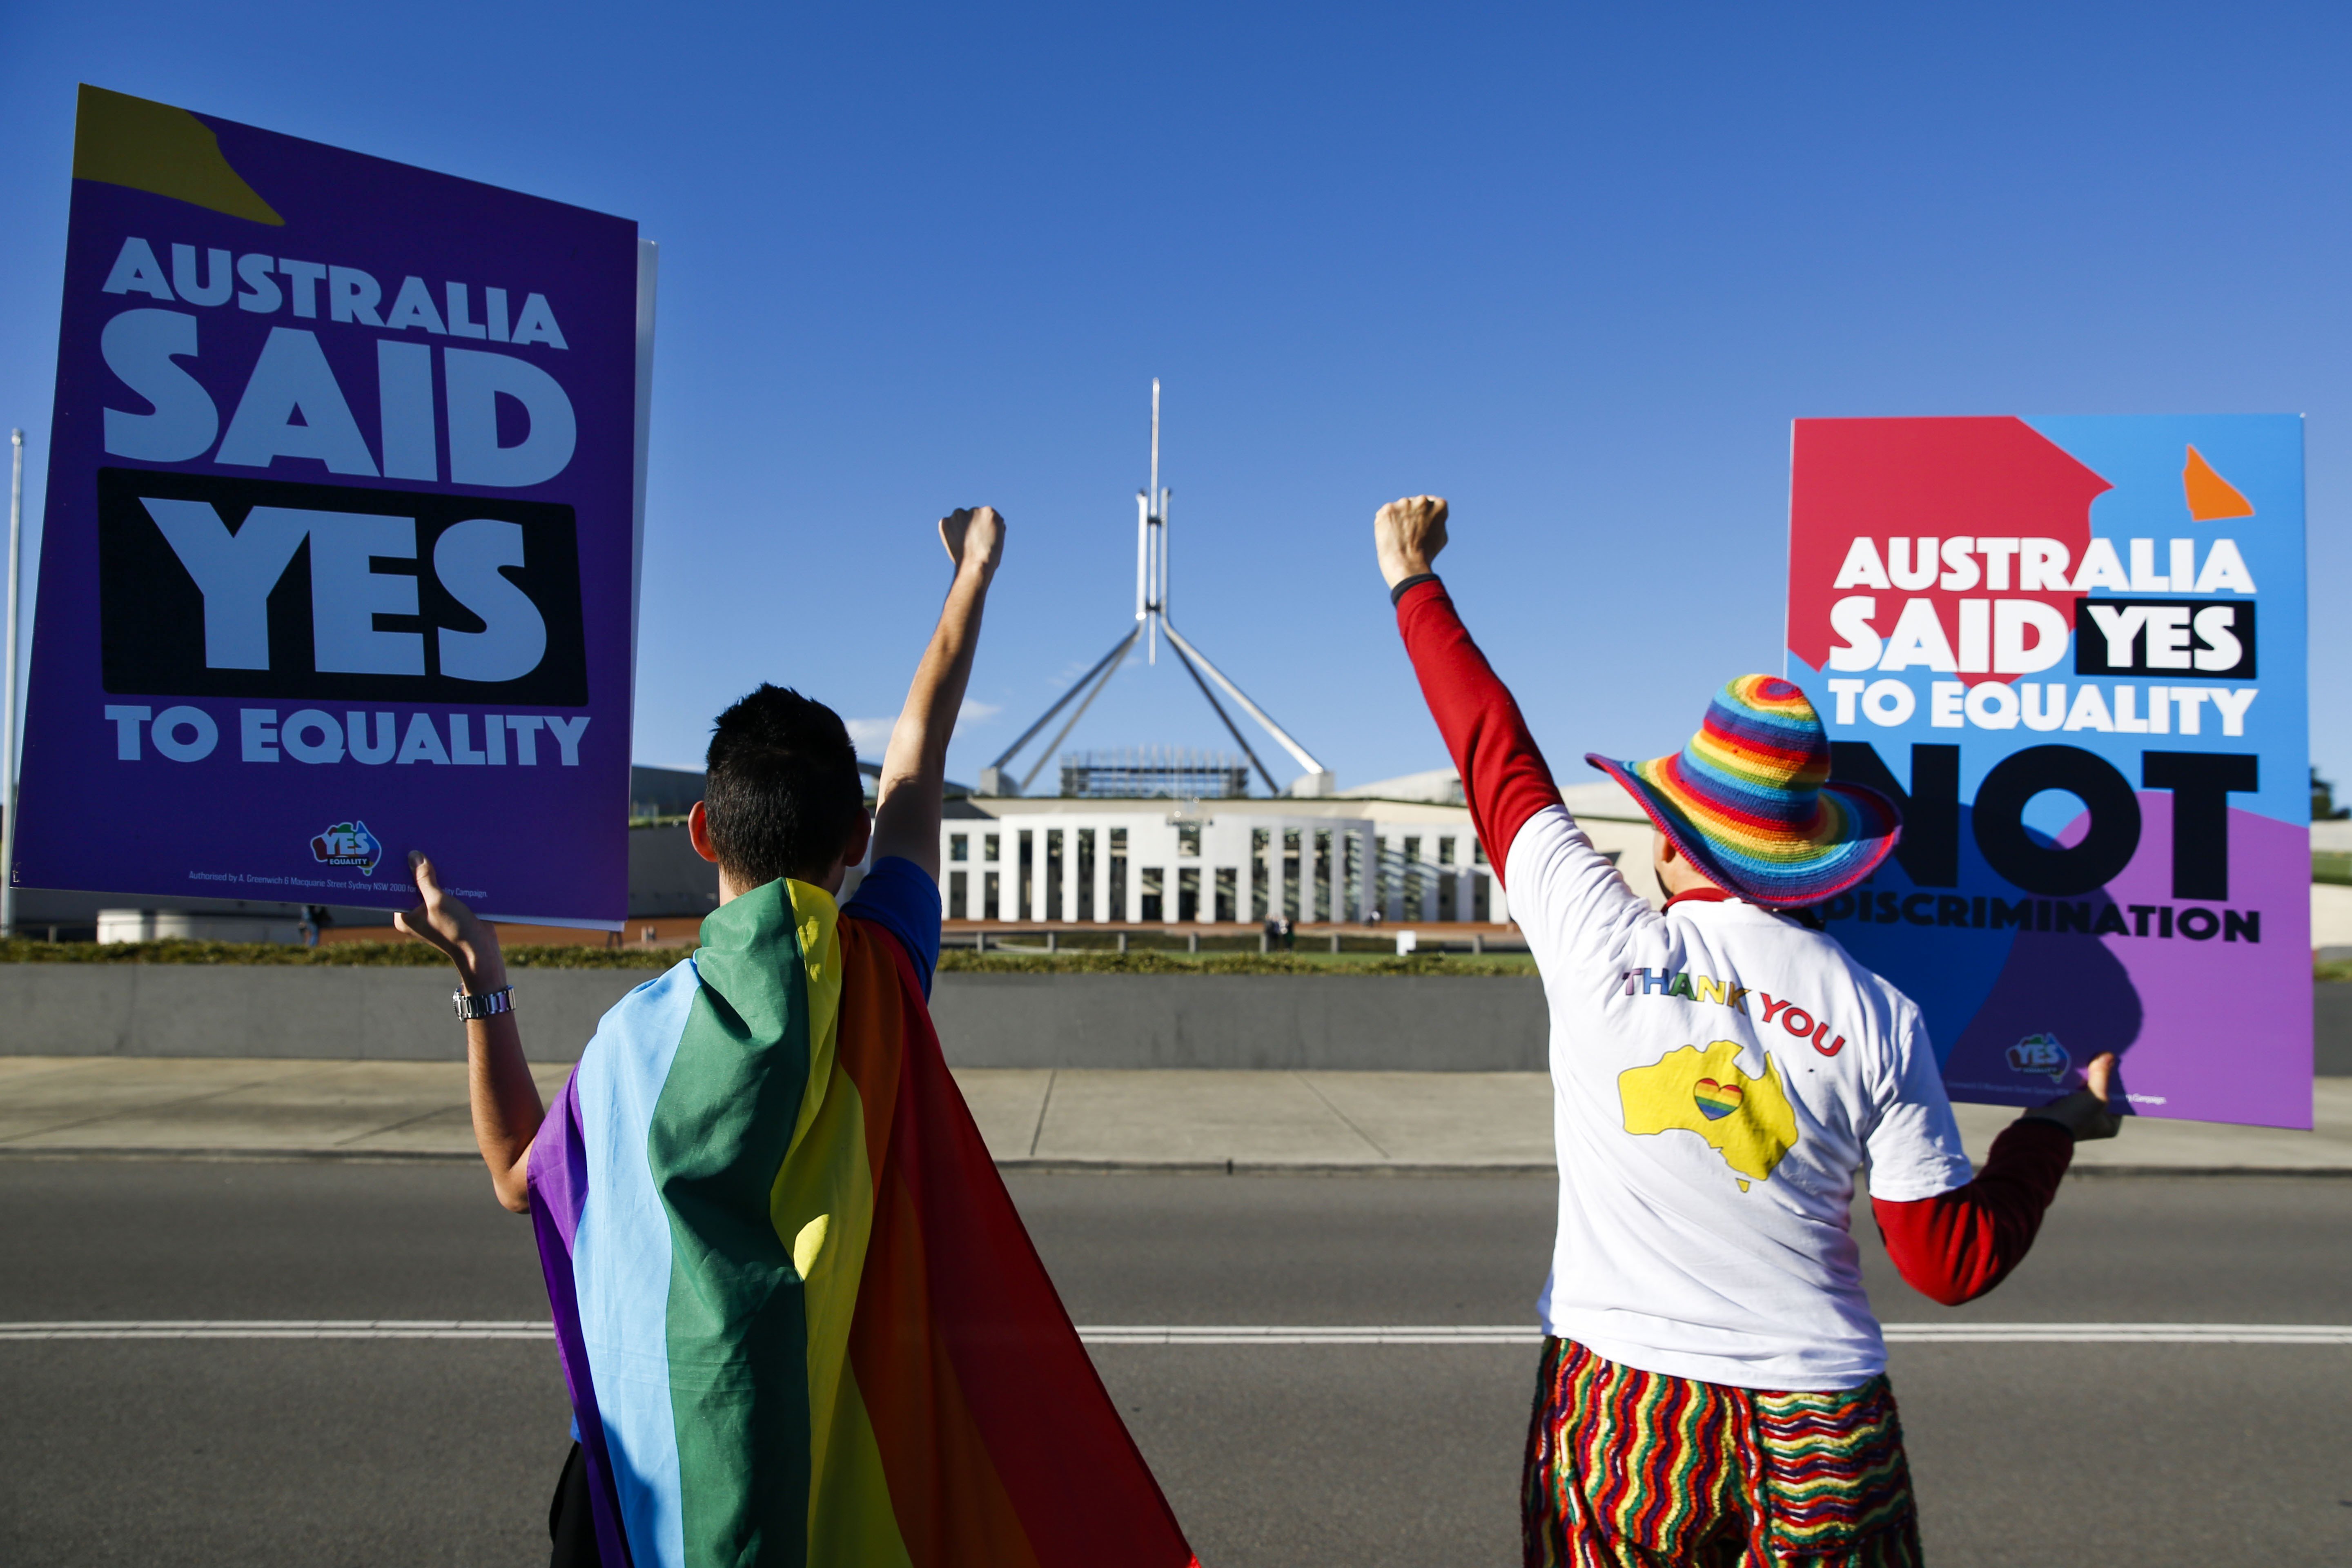 Equality ambassadors and volunteers from the Equality Campaign celebrate in front of Parliament House in Canberra ahead of the parliamentary vote on same sex marriage, which was passed. Photo: AFP